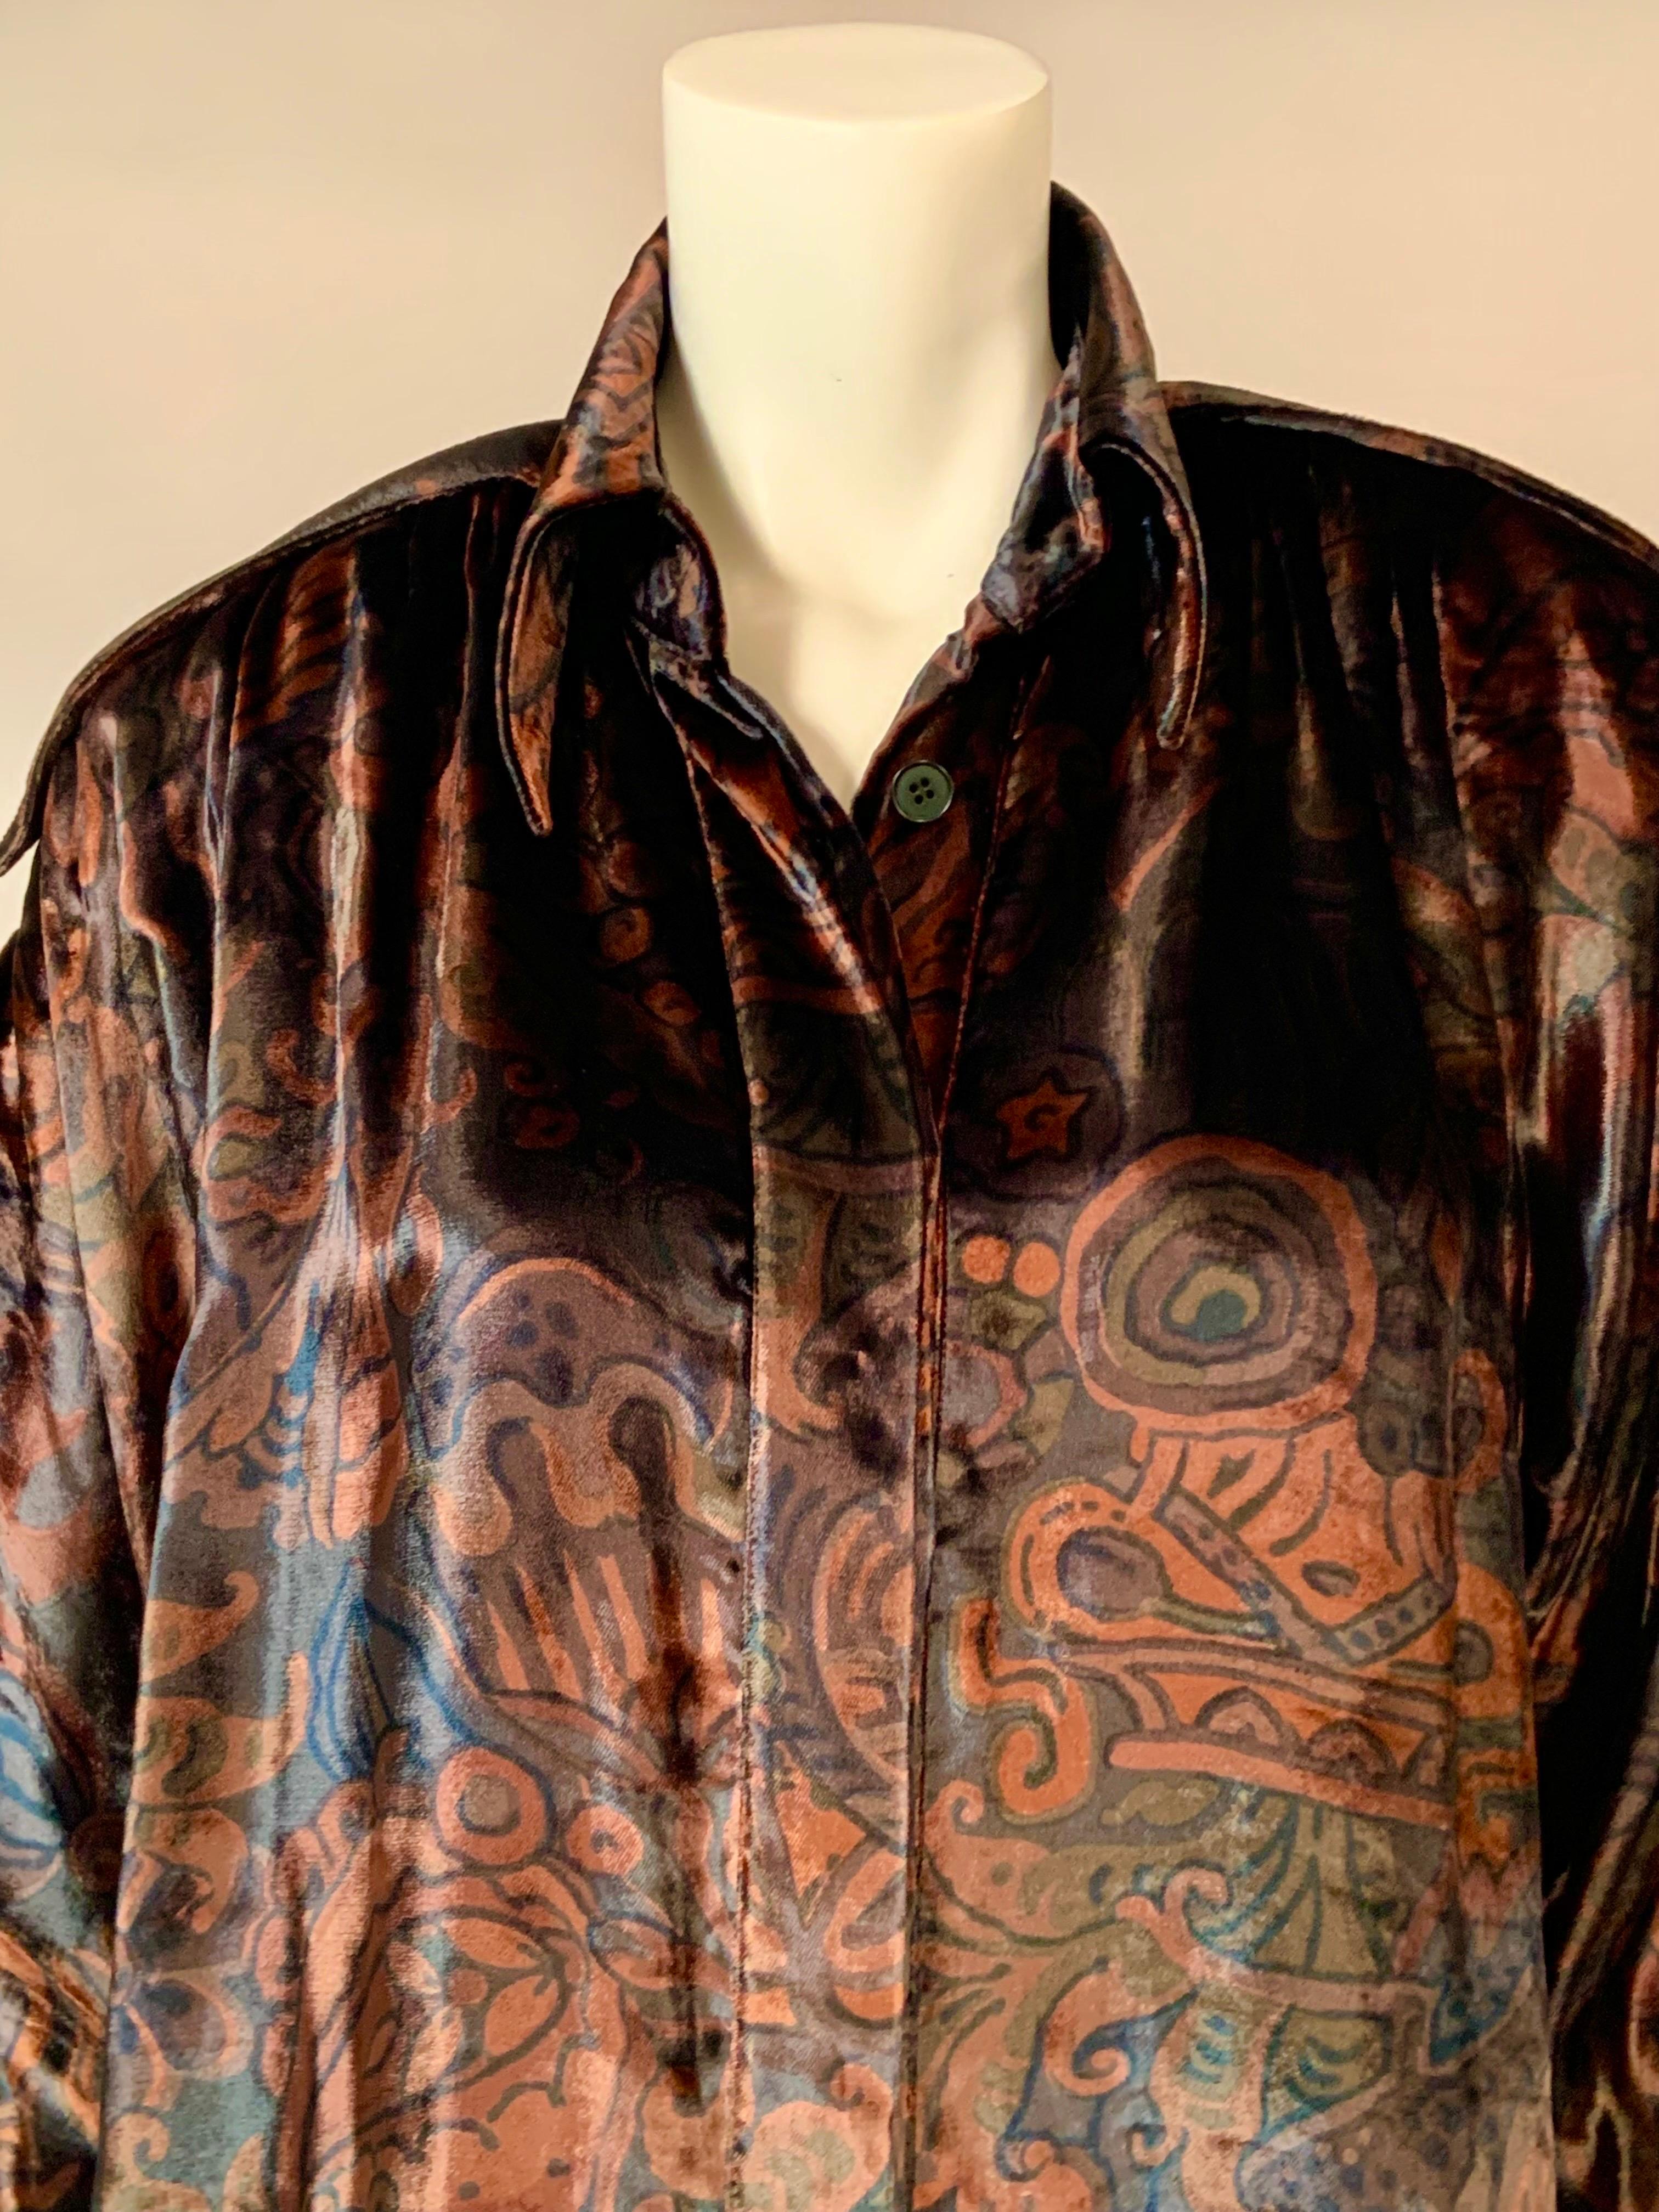 This printed panne velvet blouse from Fendi is copper and charcoal with a lot of interesting design features.  The shoulders have epaulets, the front is gathered at the shoulder seam, the sleeves are cut very full, and the back has a V shaped panel